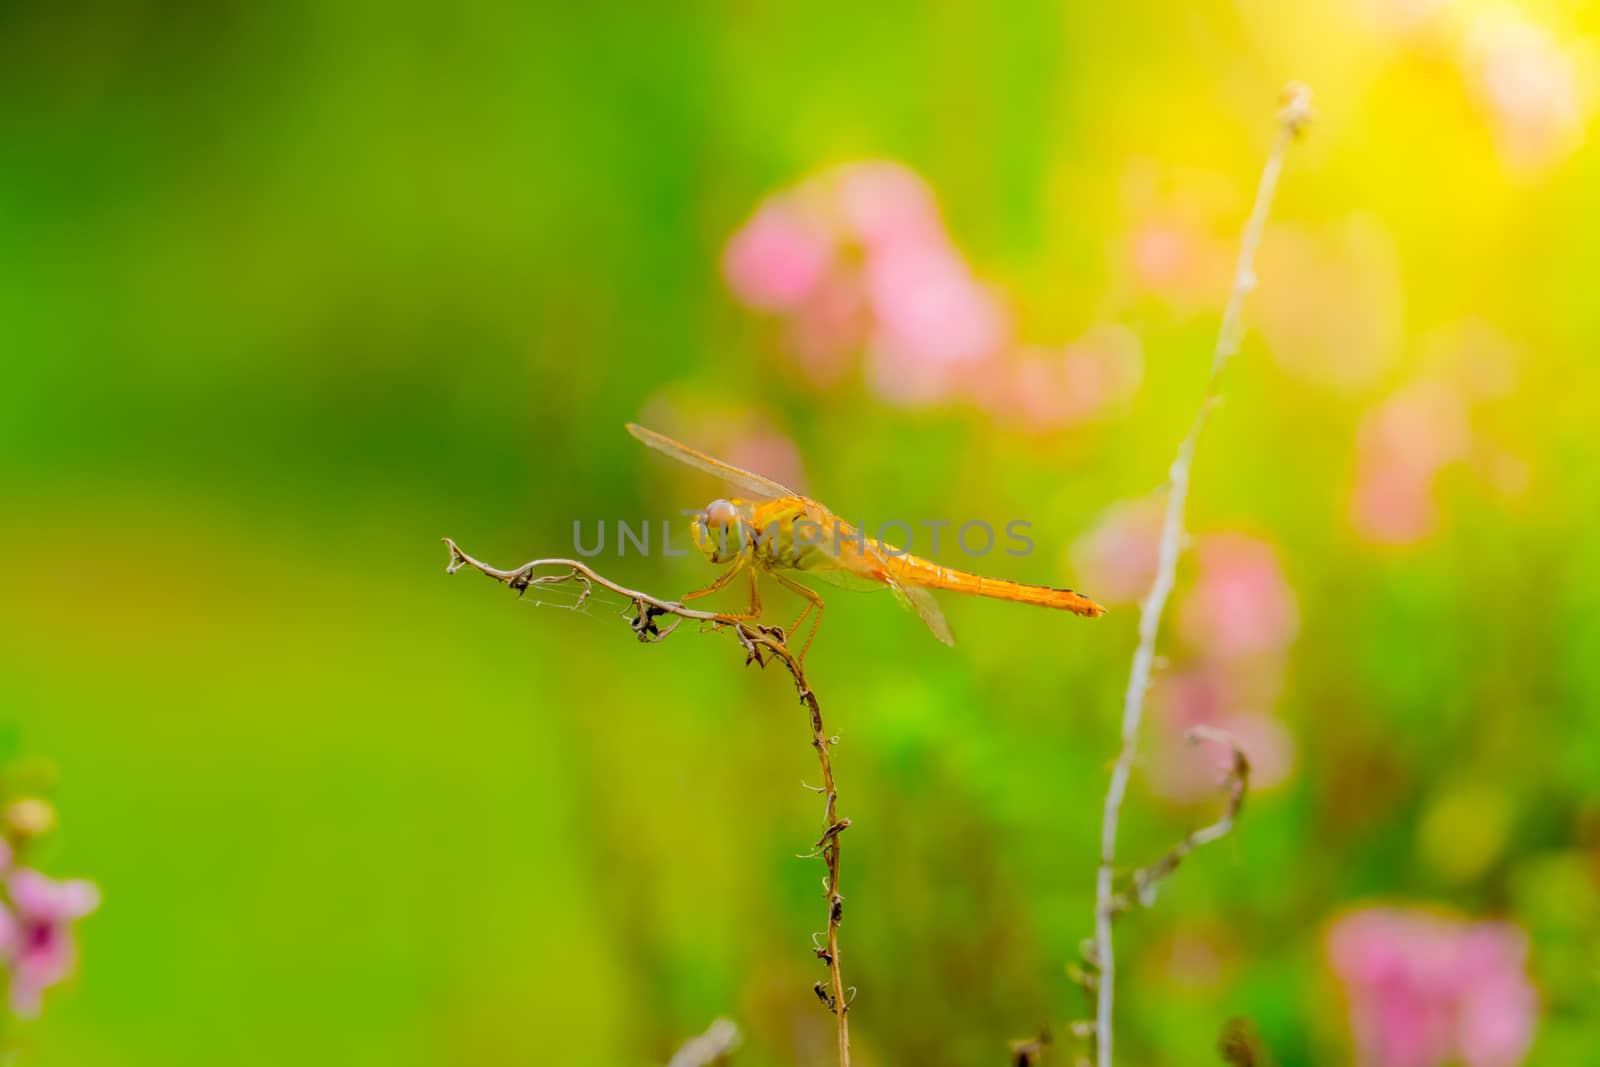 dragonfly outdoor on wet morning, nature background